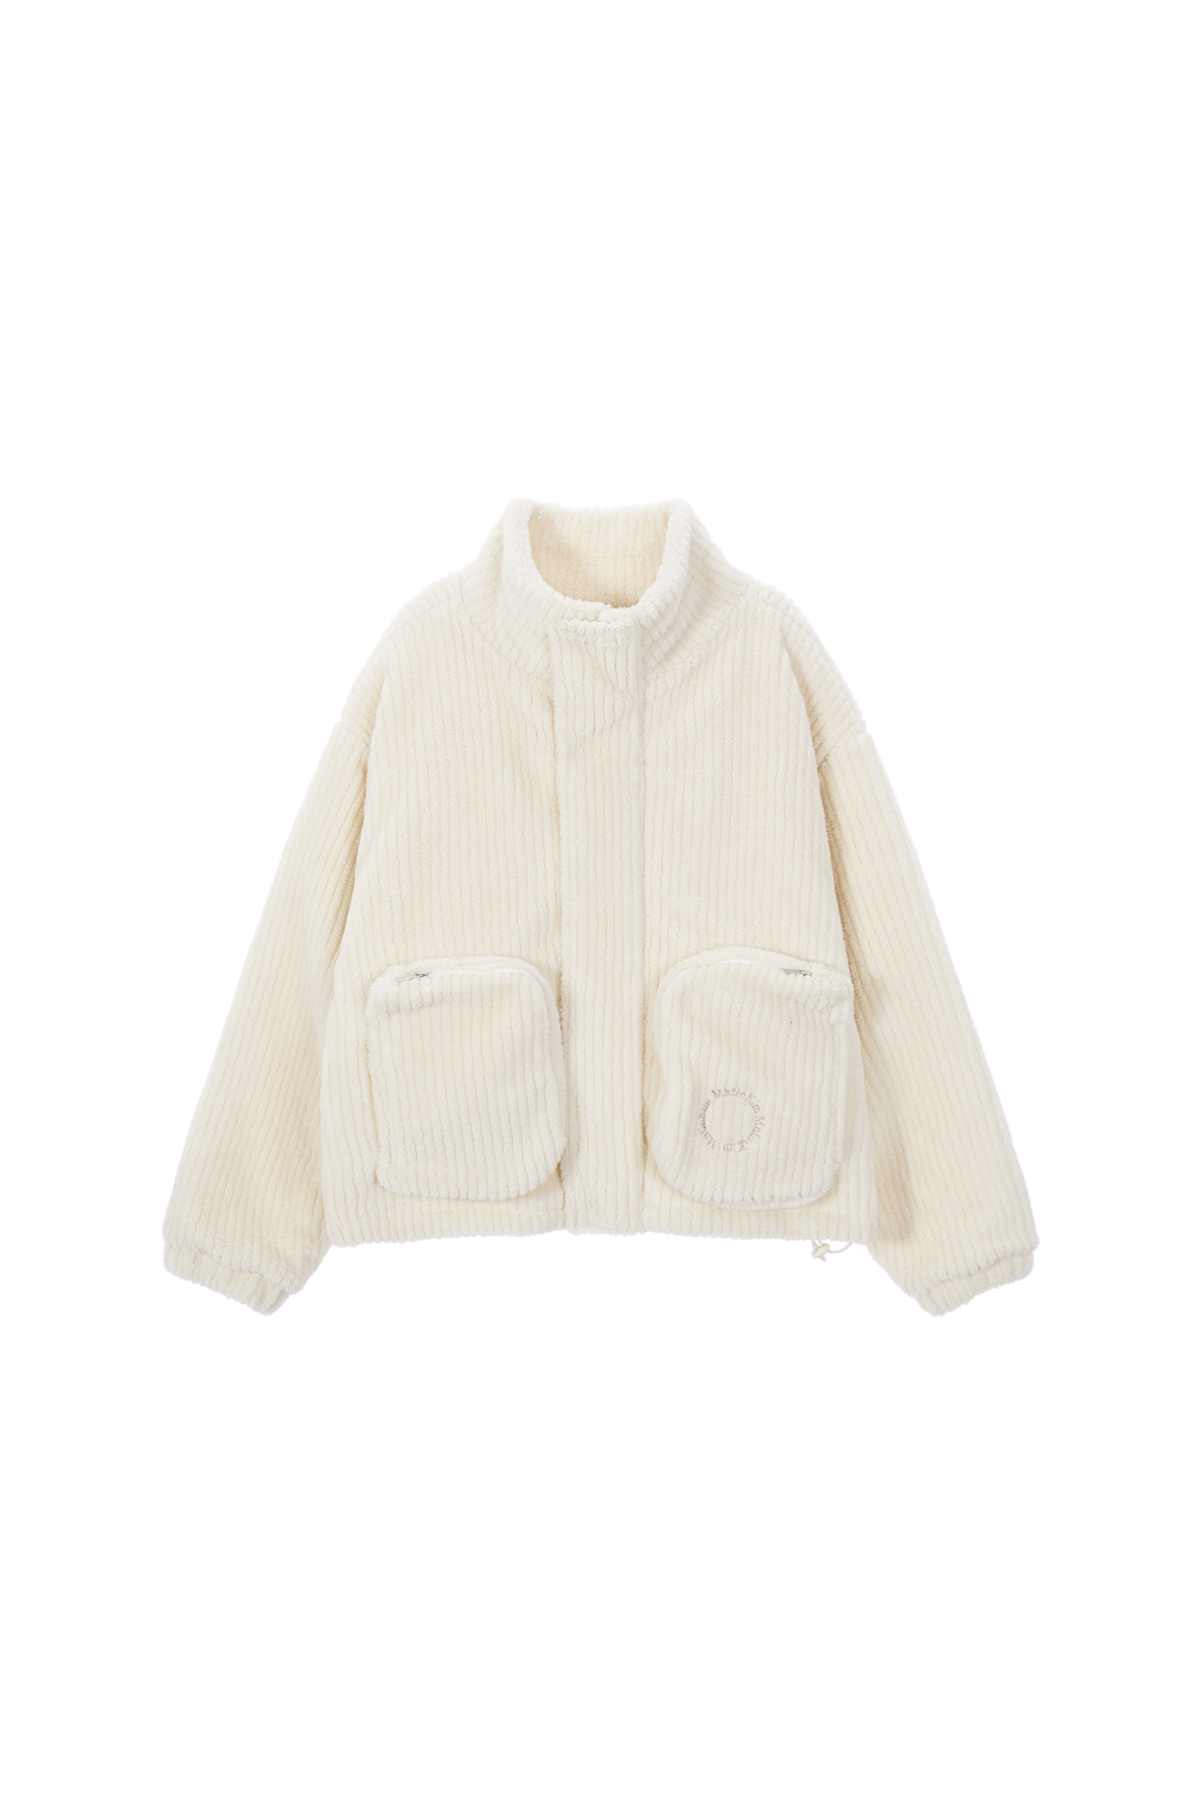 OUT POCKET FUZZY PUFFER JUMPER IN IVORY